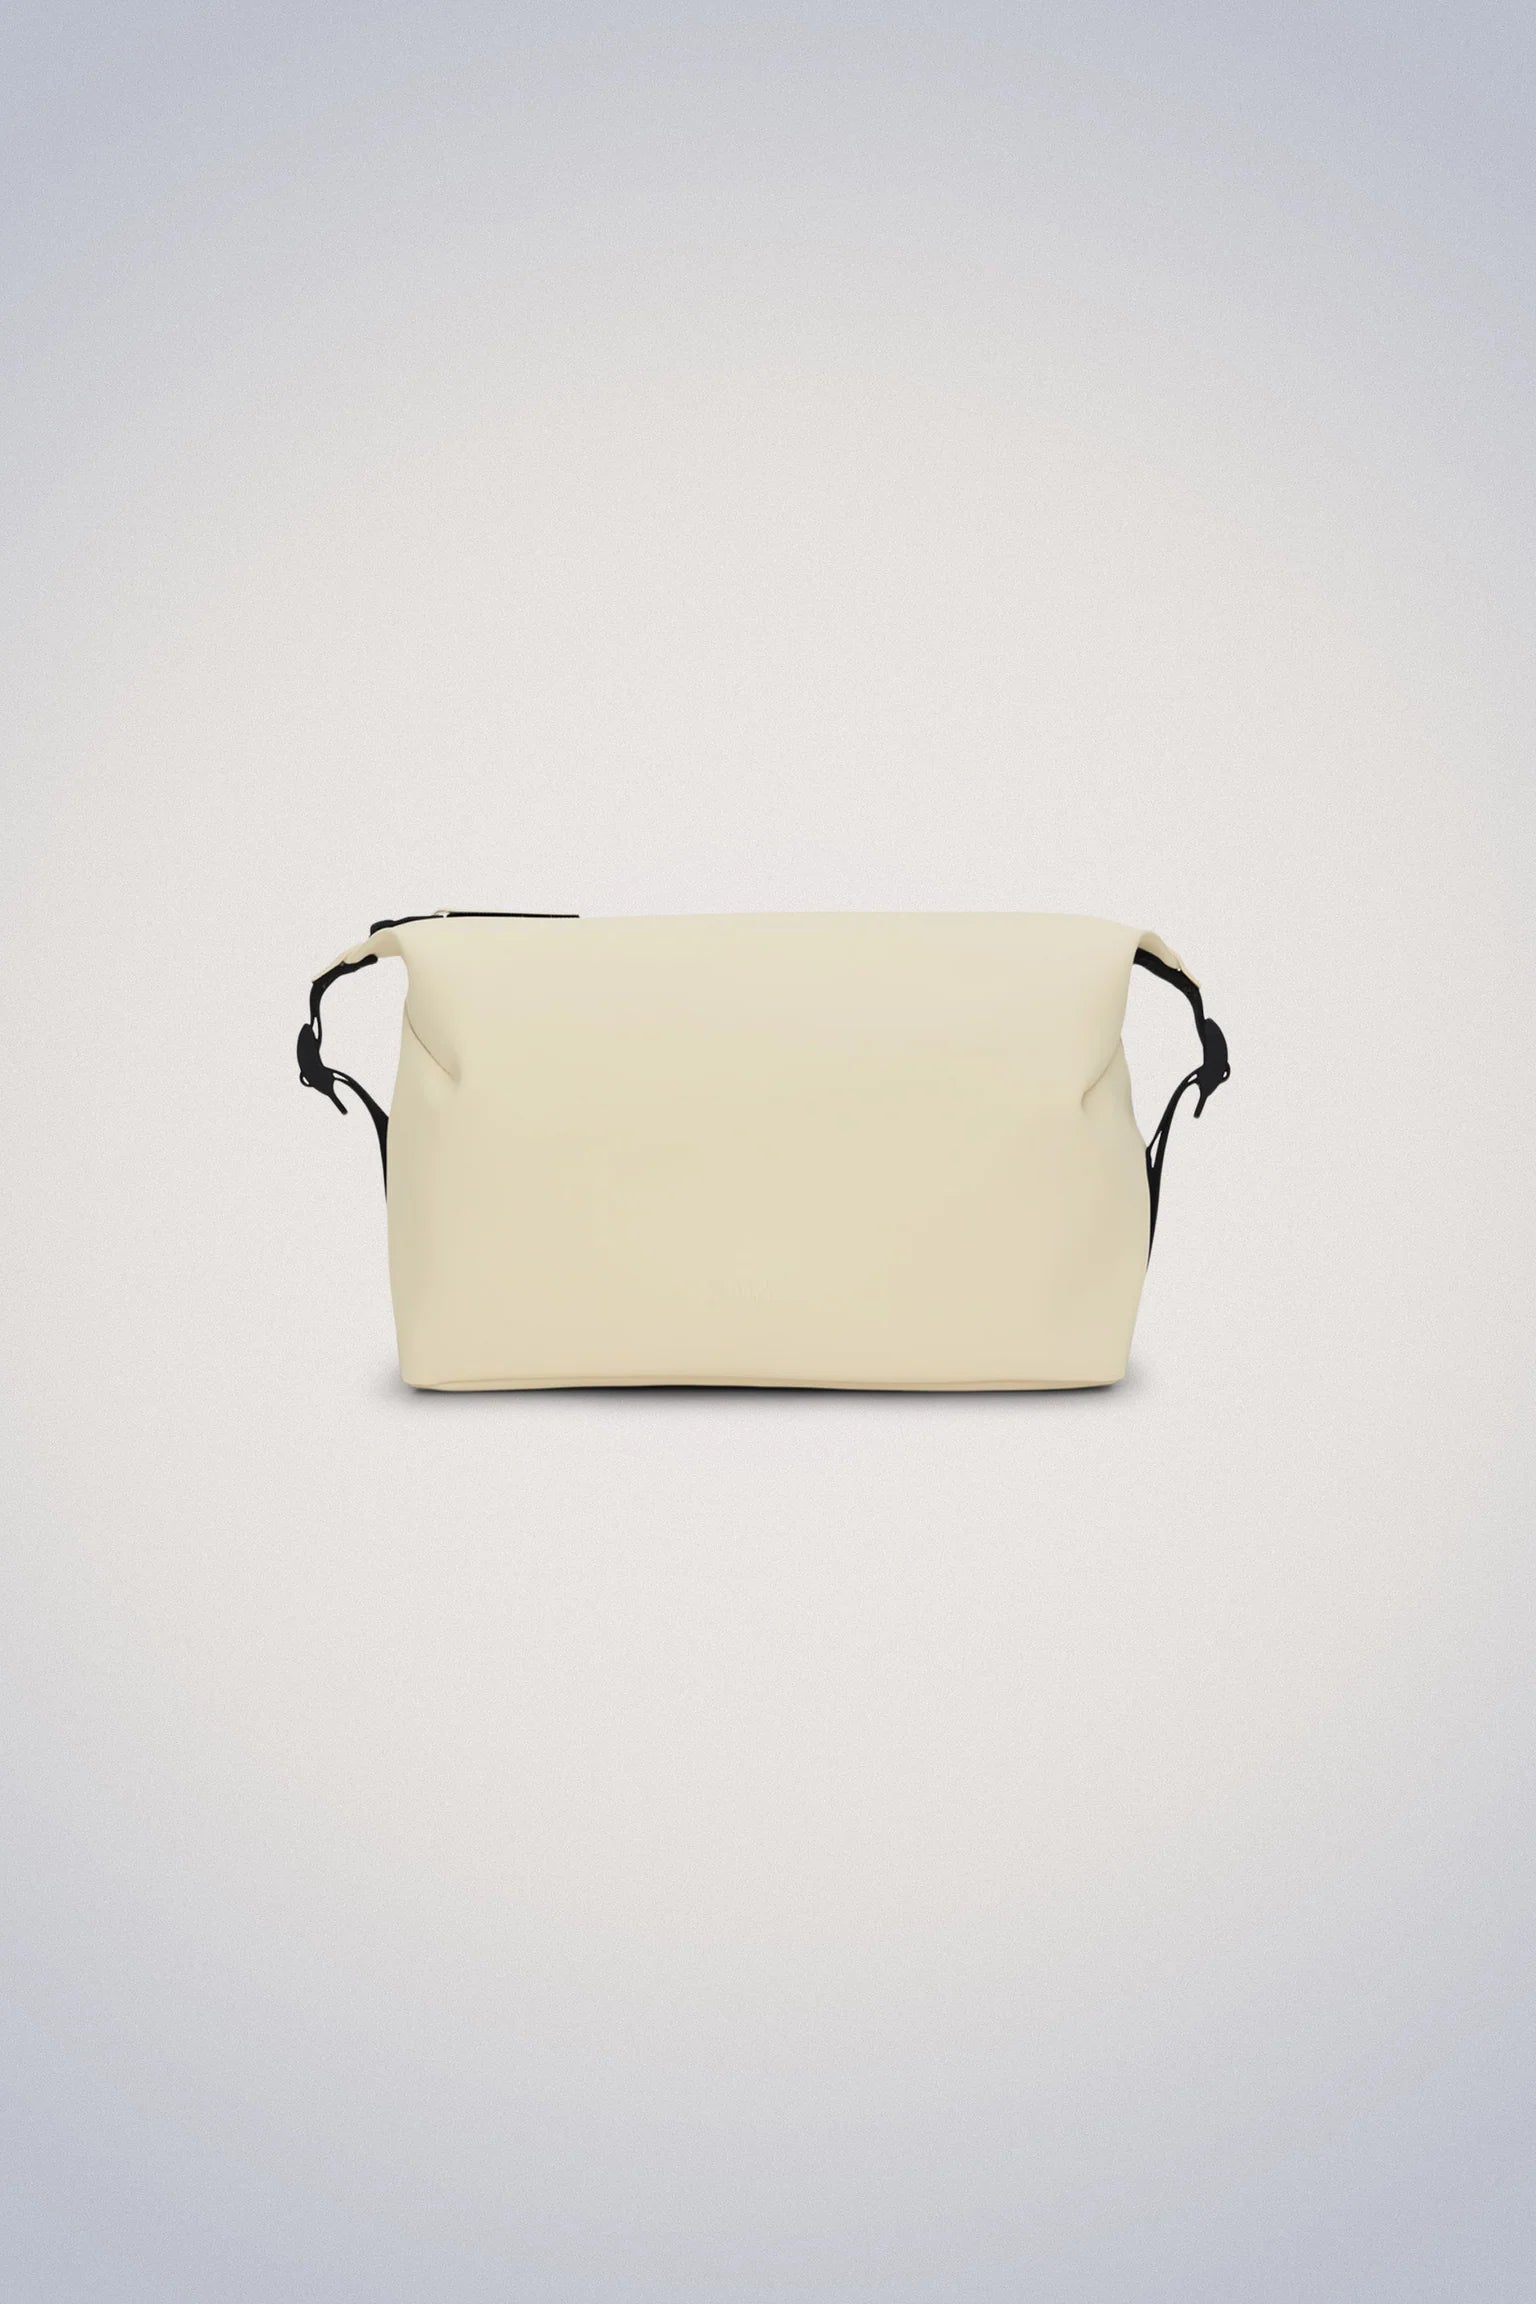 A minimalist Hilo Wash Bag - Dune by Rains with a waterproof design on a white background.